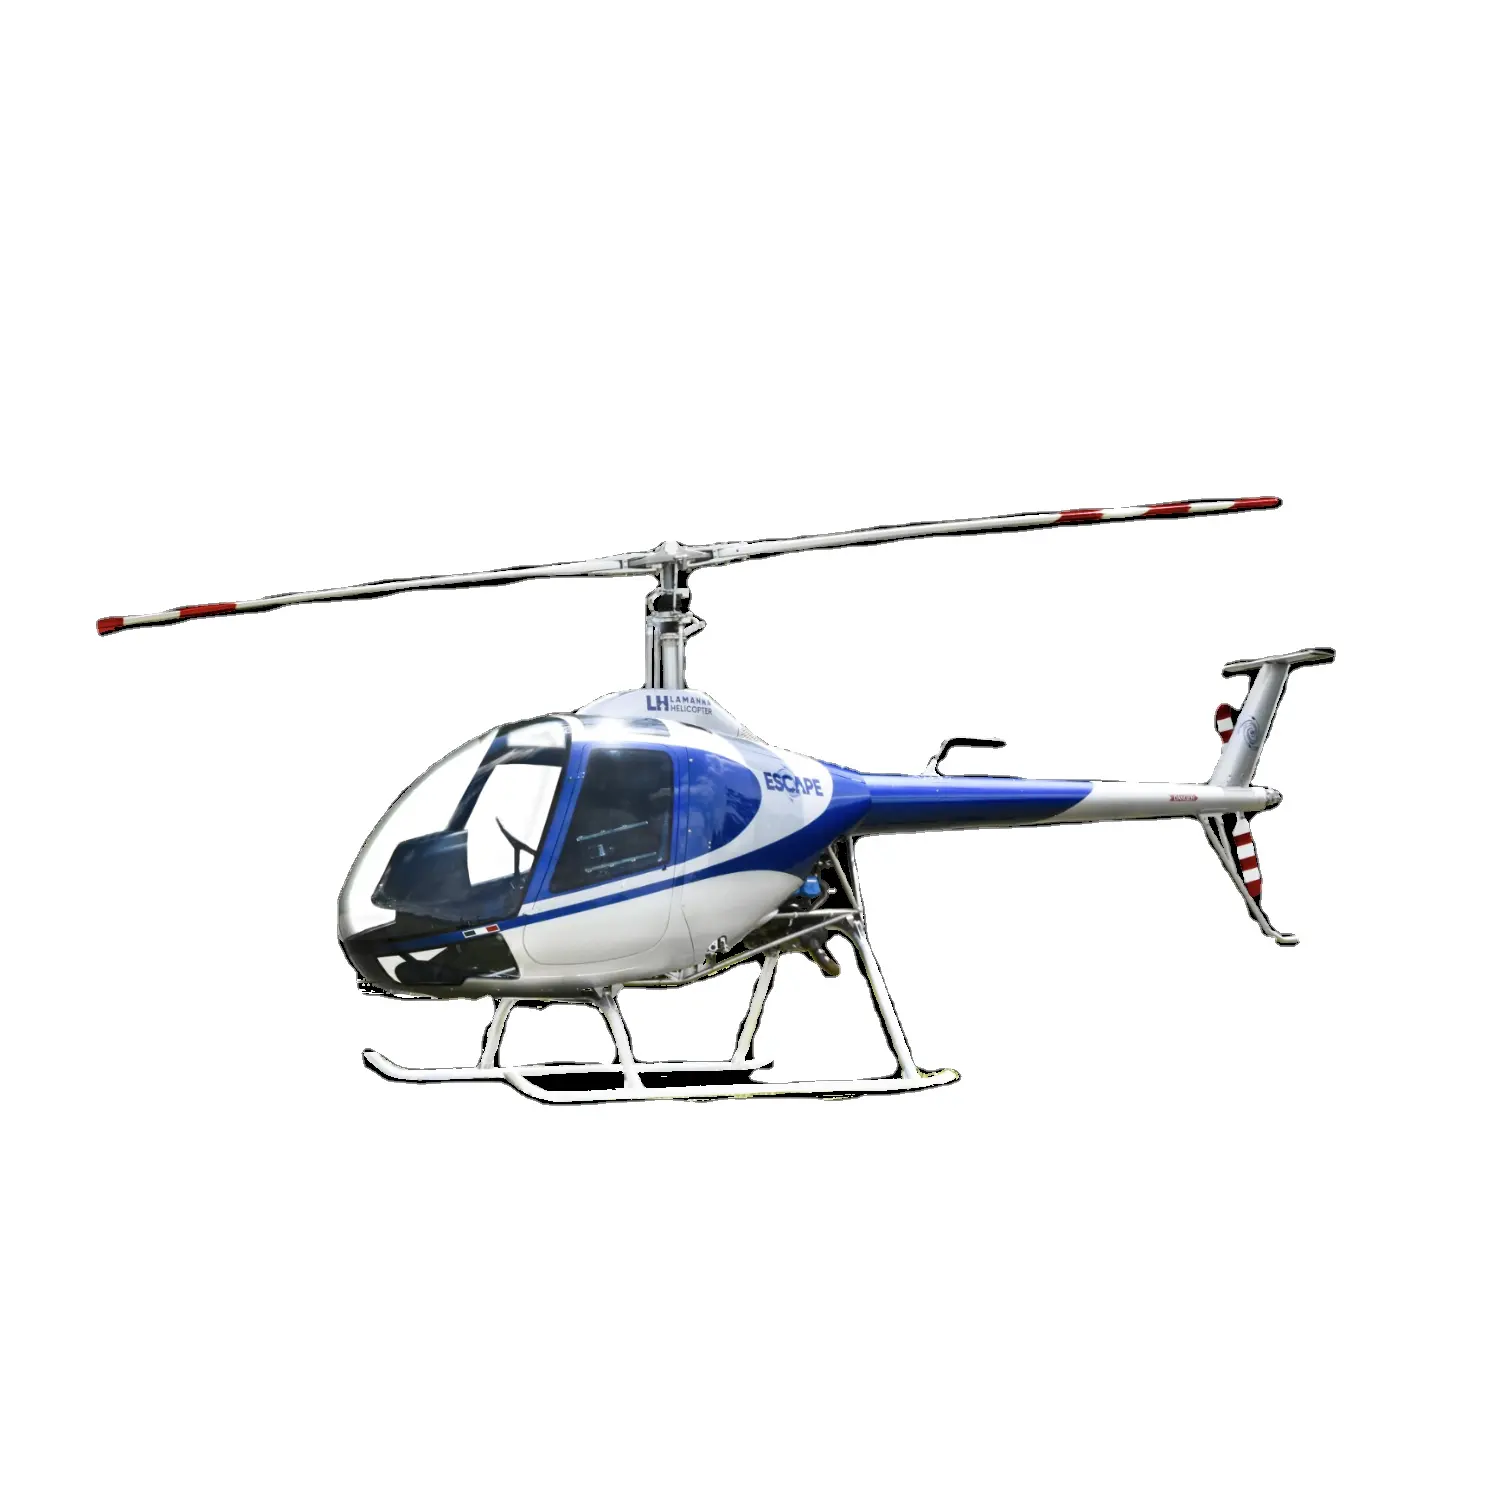 Panoramic Views With Advanced Helicopter Features - Advanced Sliding Window Mechanism - Broaden Your Aerial Horizons